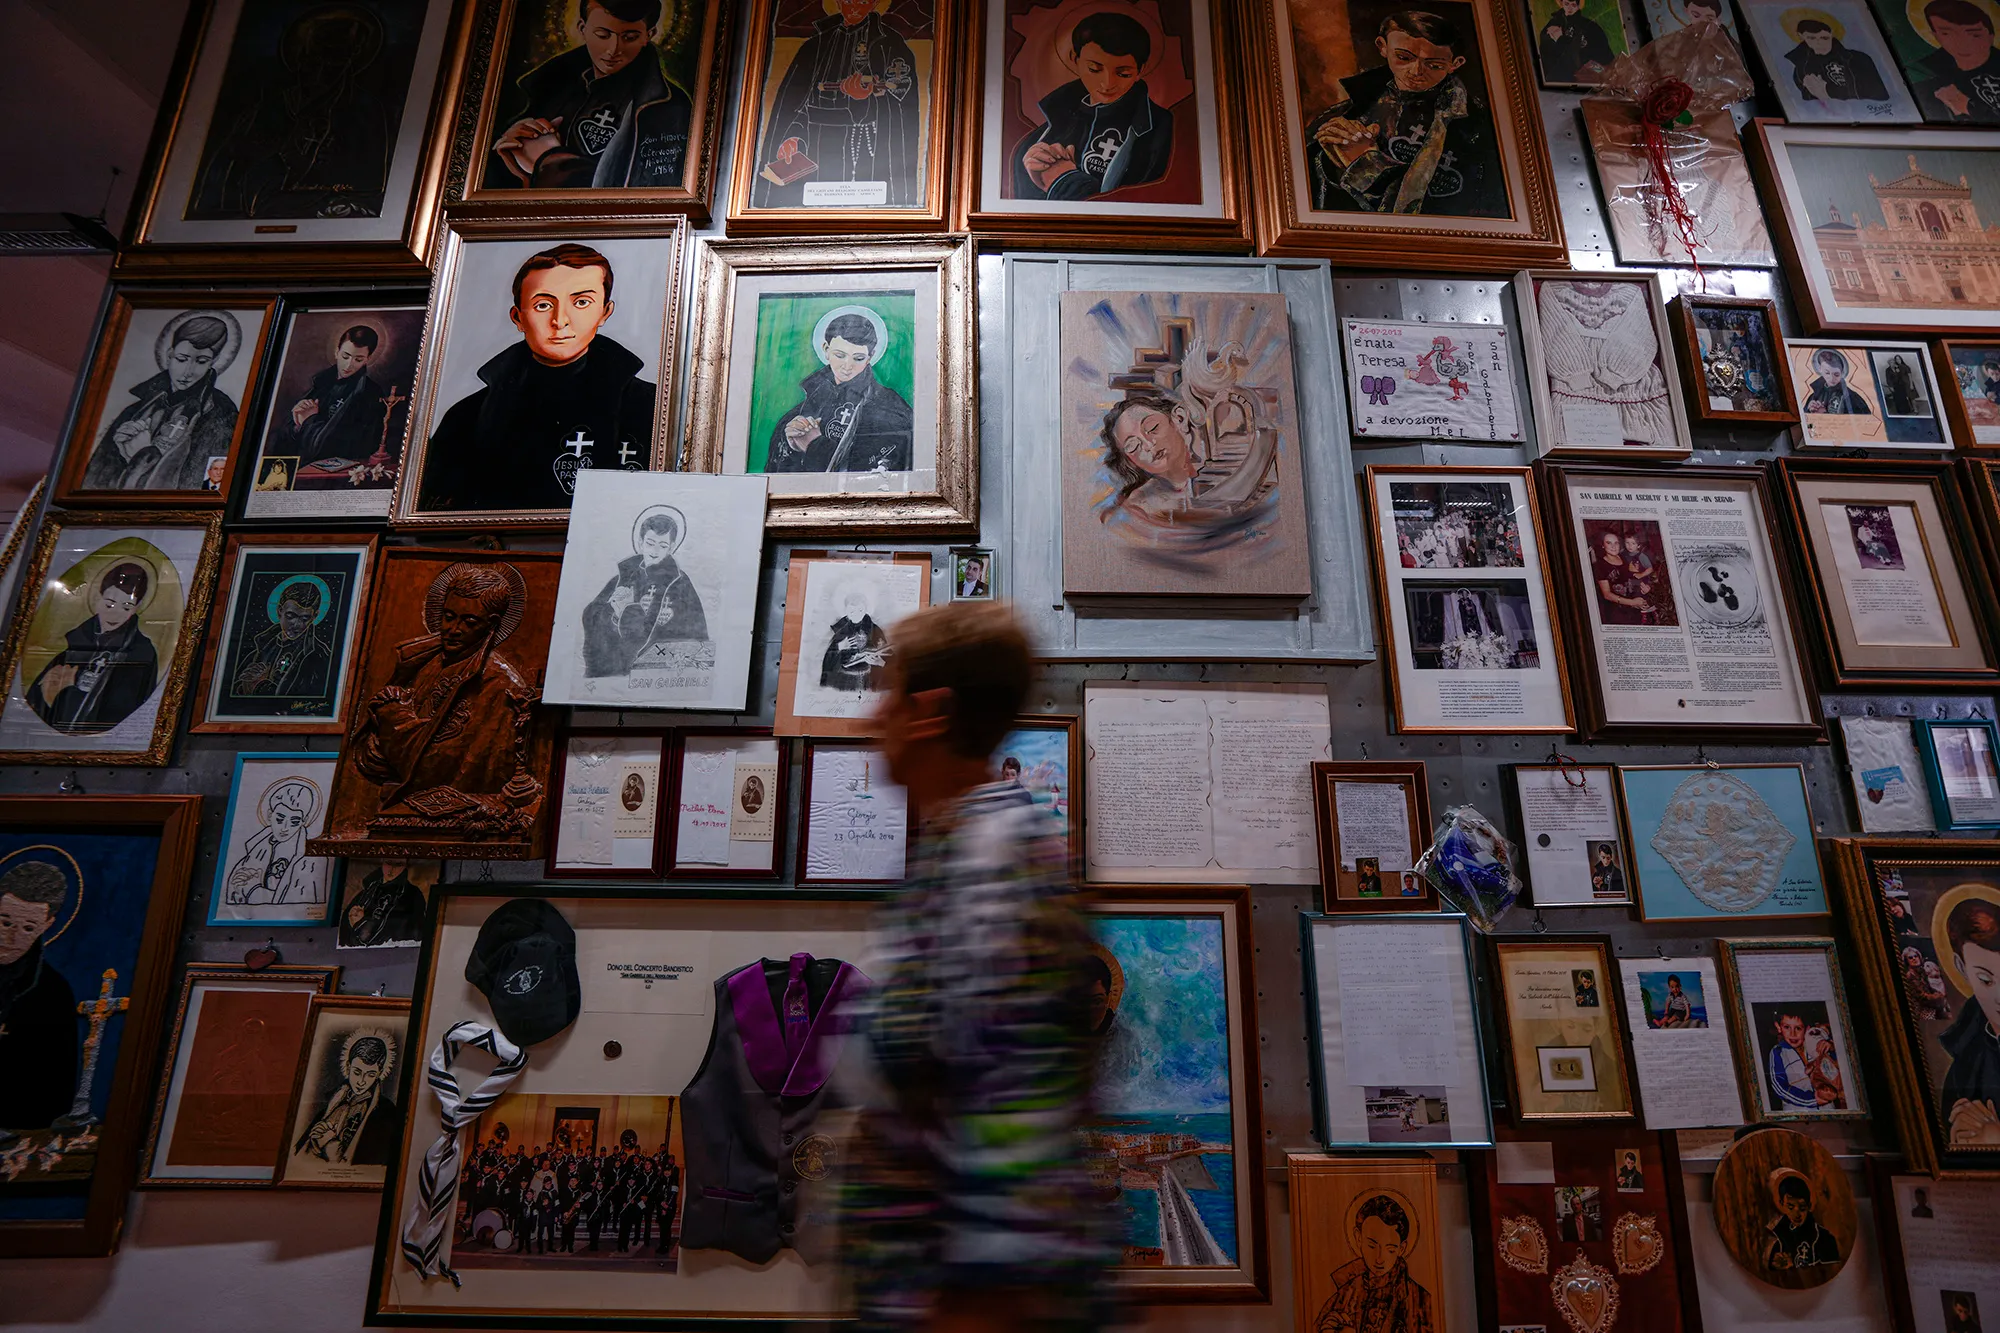 A wall covered in framed religious artwork and documents